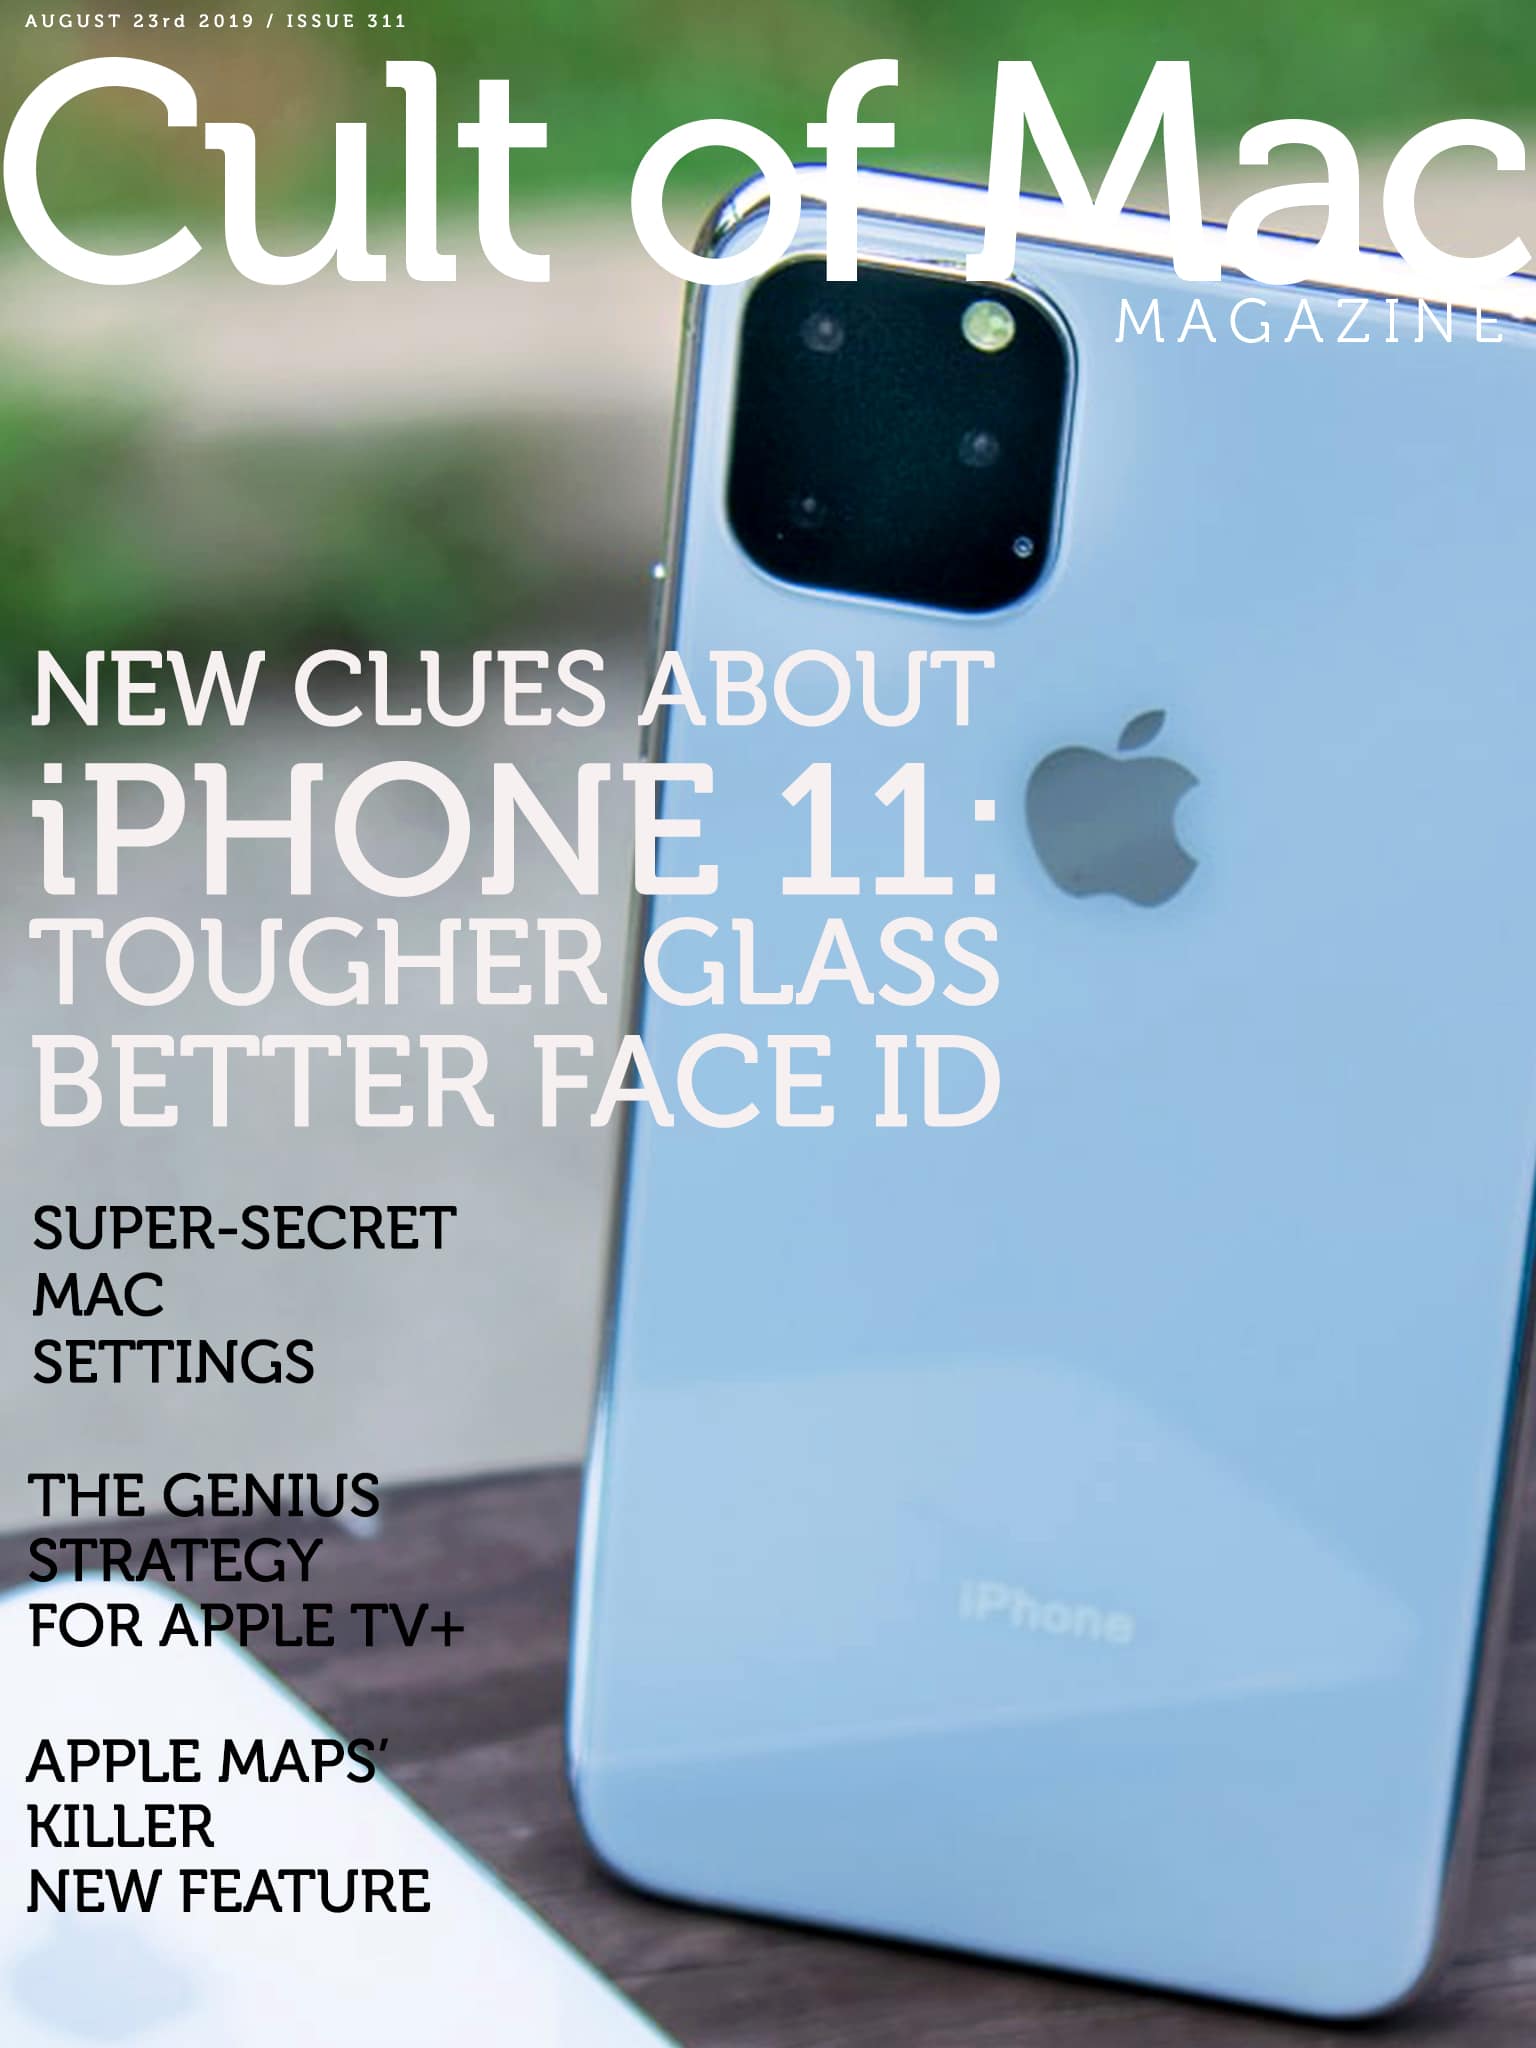 Get the week's best Apple product leaks and rumors in this week's issue of Cult of Mac Magazine.